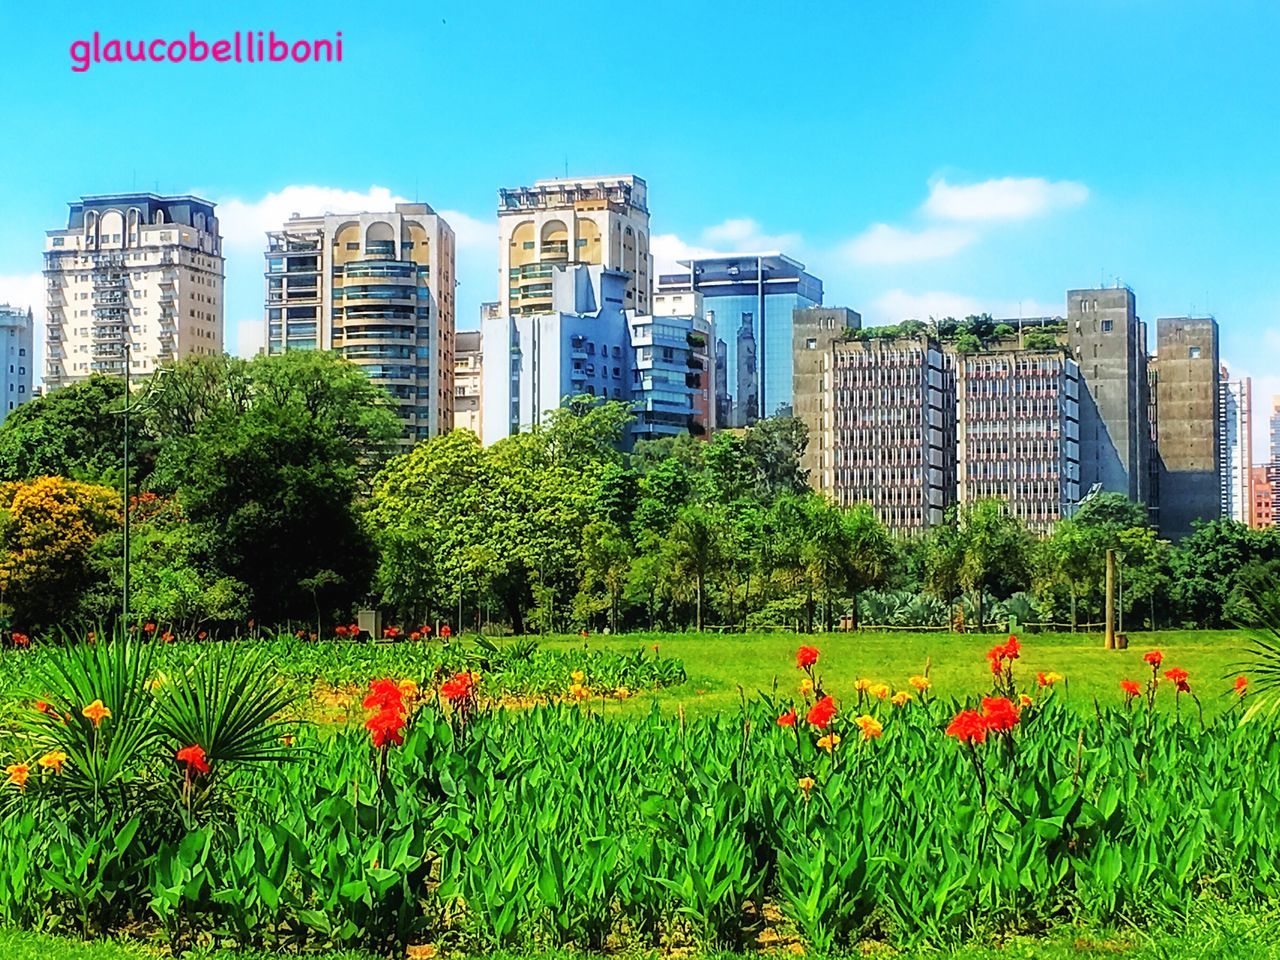 building exterior, architecture, built structure, growth, city, skyscraper, flower, modern, tree, sky, tower, office building, plant, tall - high, green color, cityscape, urban skyline, field, grass, day